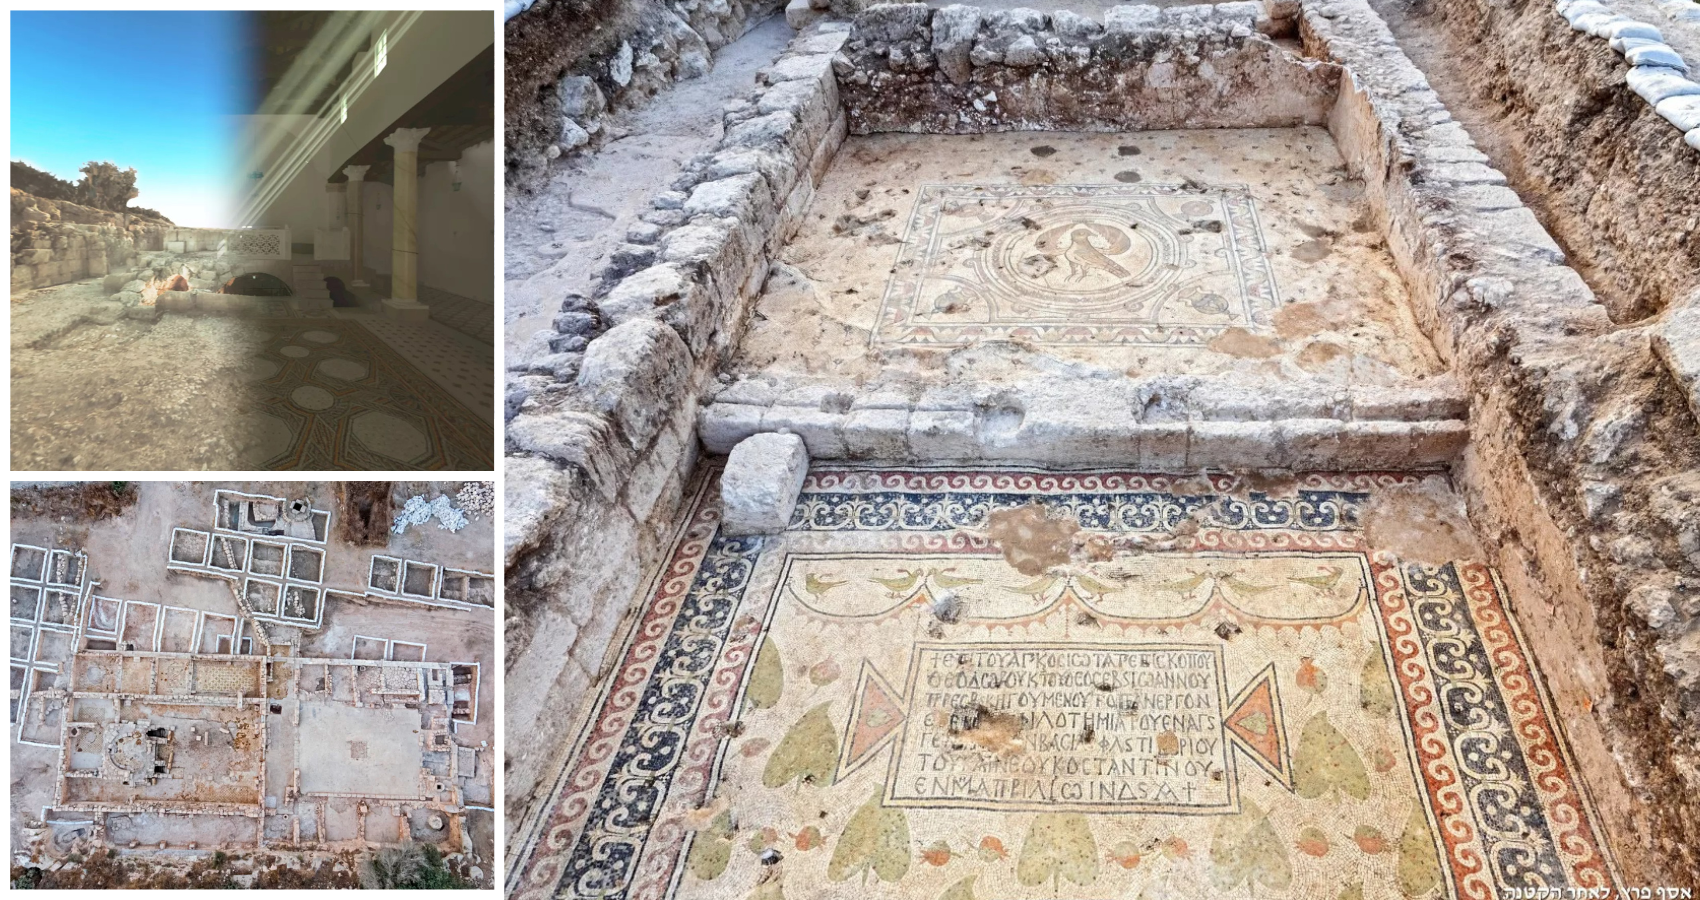 Byzantine church dedicated to unknown martyr unearthed in Israel